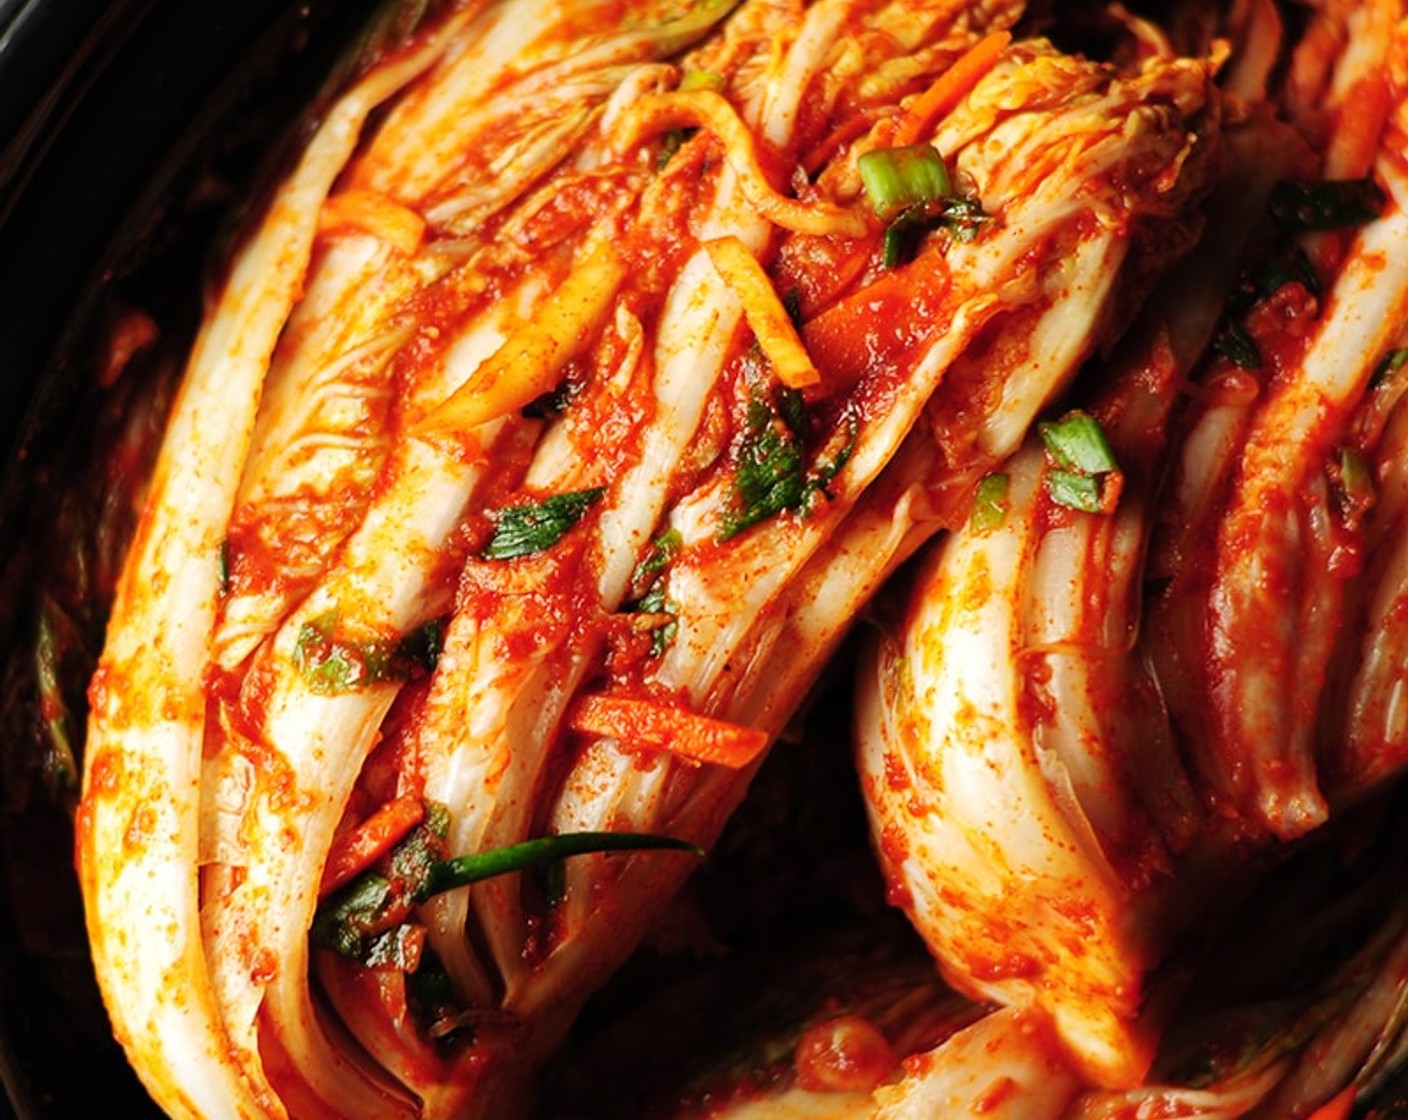 step 15 When ready, chop the kimchi and serve. Enjoy!